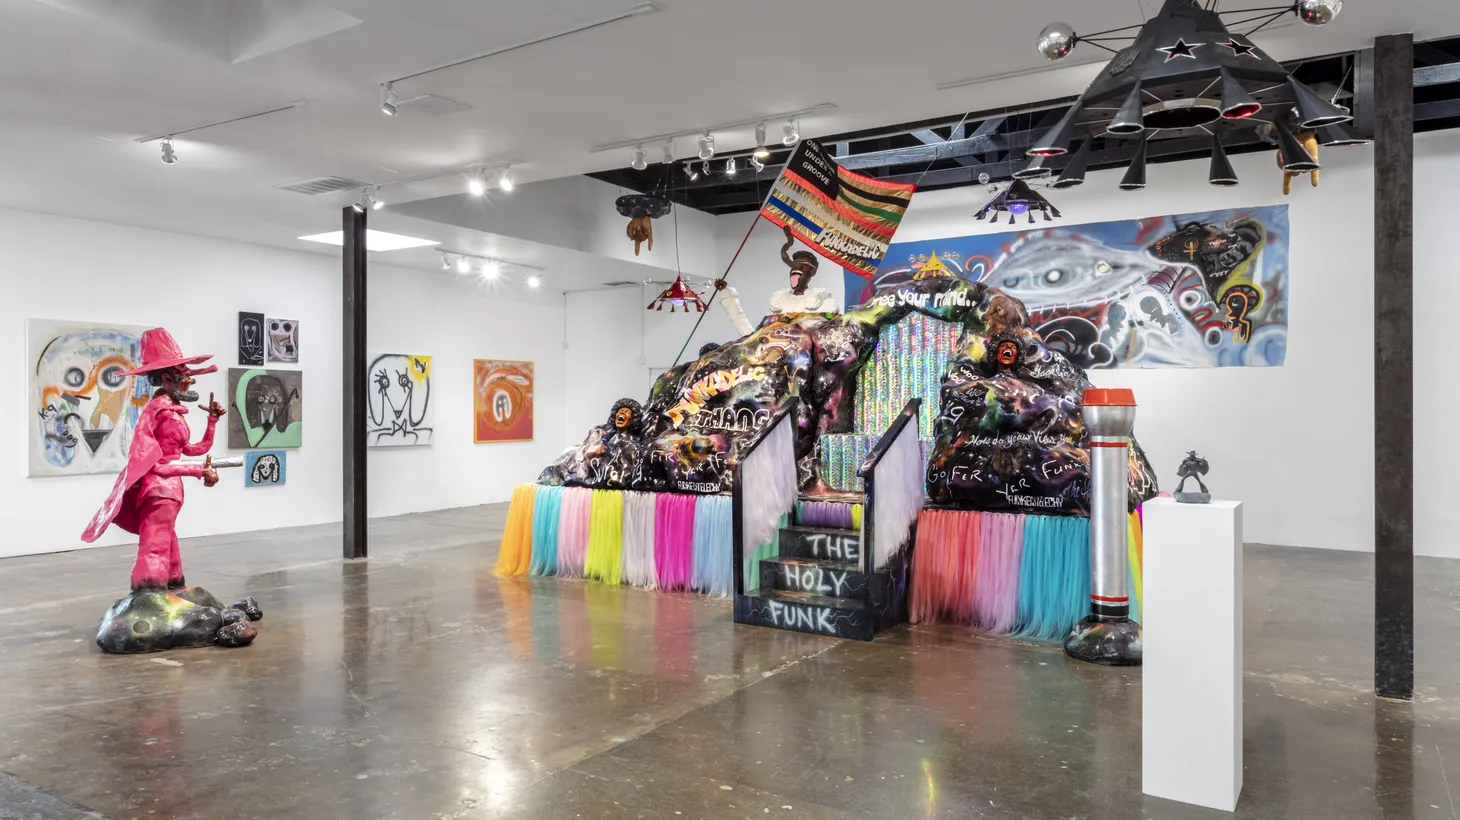 George Clinton’s The Rhythm of Vision incorporates Afrofuturism, theatrical flourishes, and canine motifs as a nod to his famous song Atomic Dog. Courtesy of Jeffrey Deitch, Los Angeles.